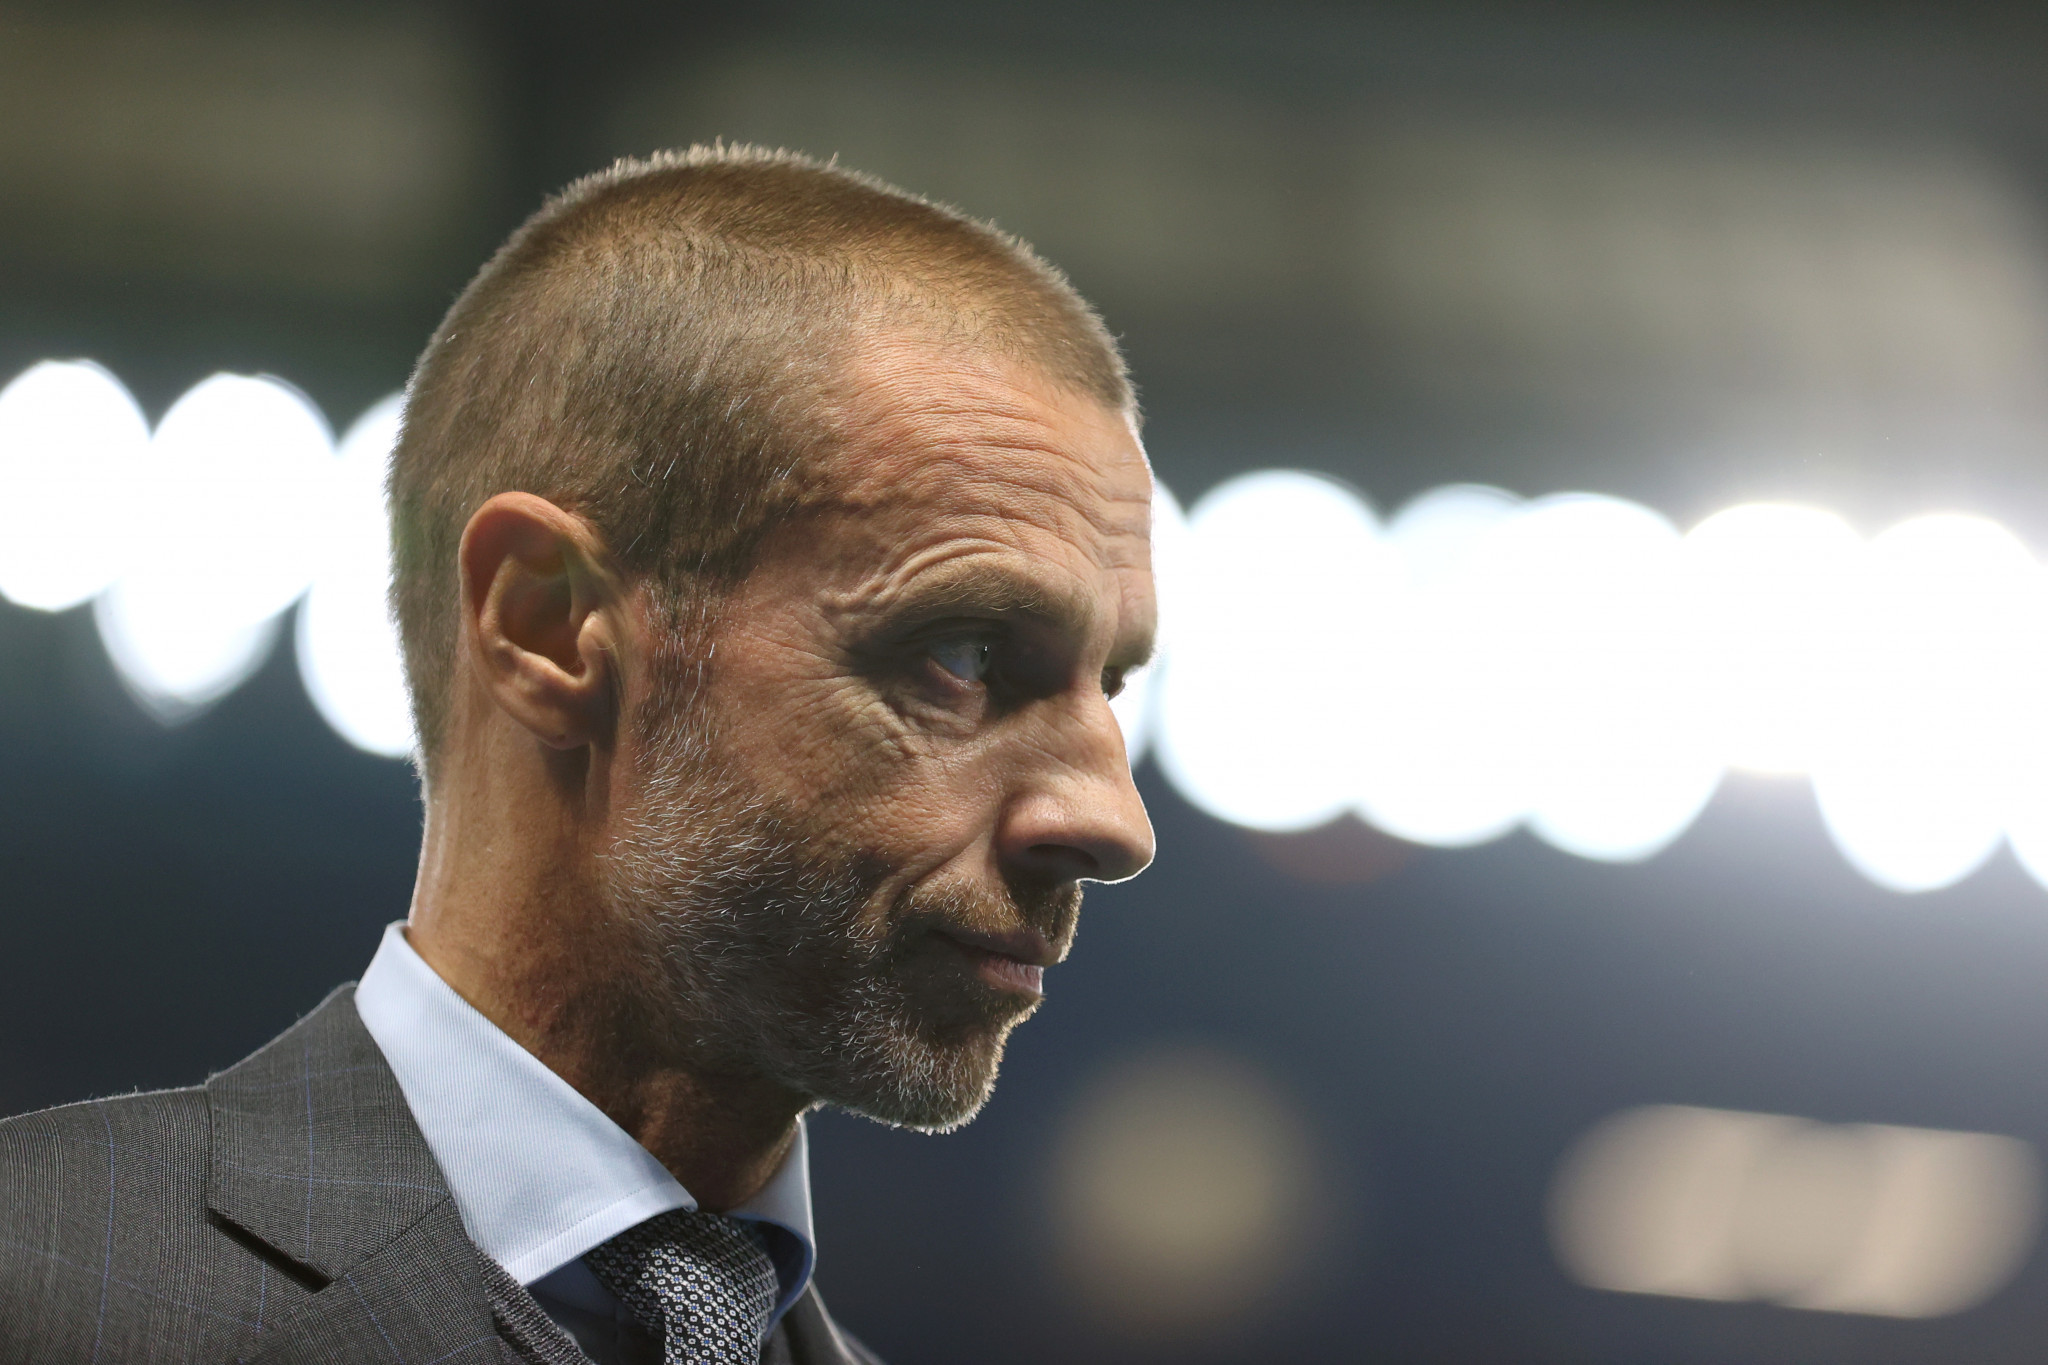 UEFA President Aleksander Čeferin claimed the controversial and significant changes to the men's Champions League showed its commitment to 